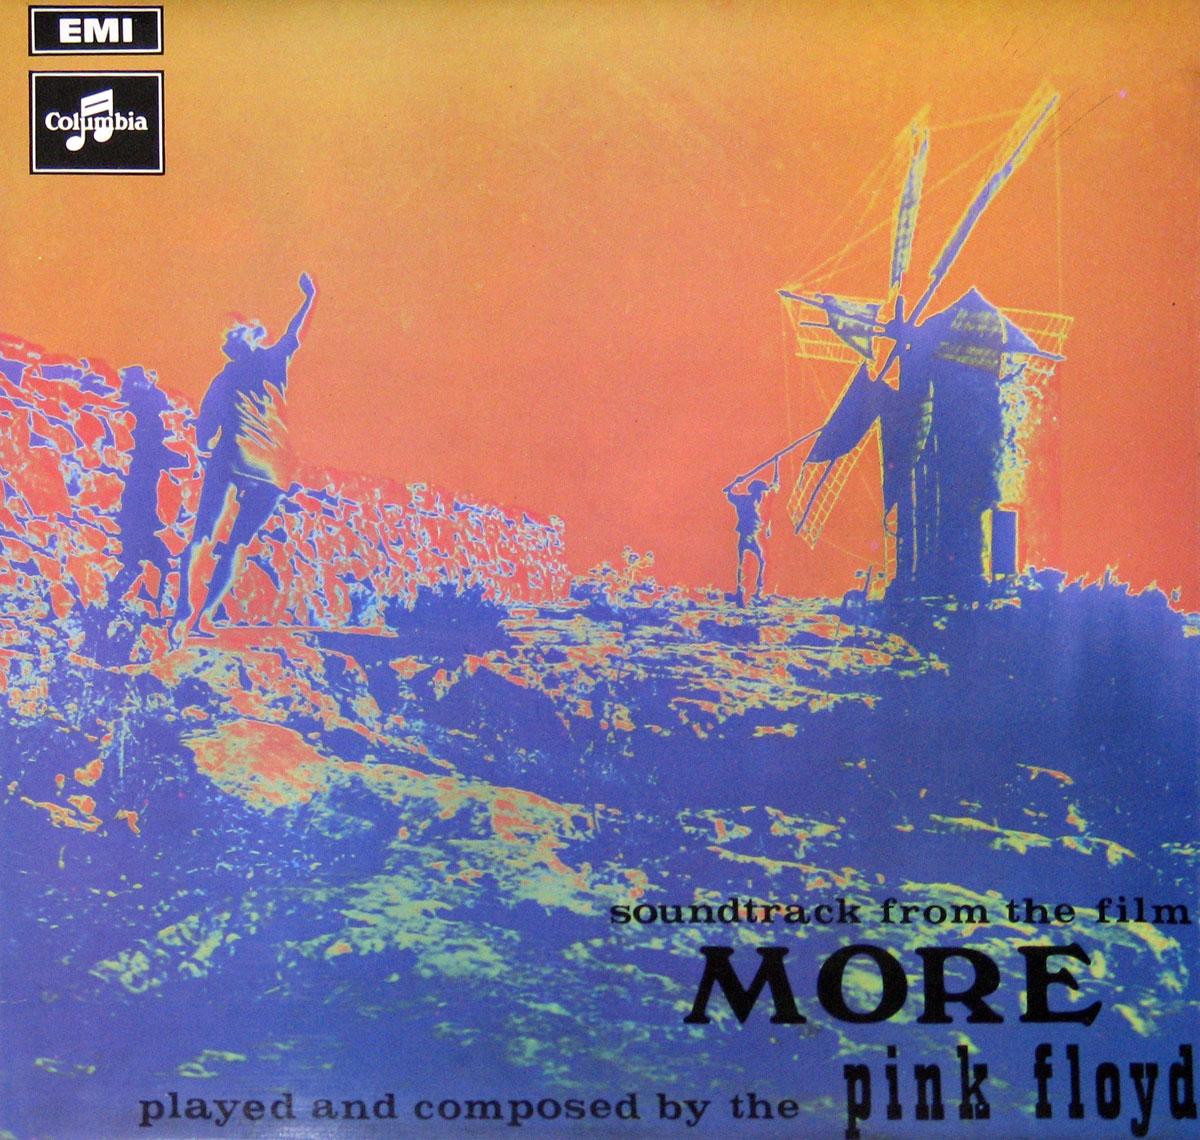 Pink Floyd - "More" OST